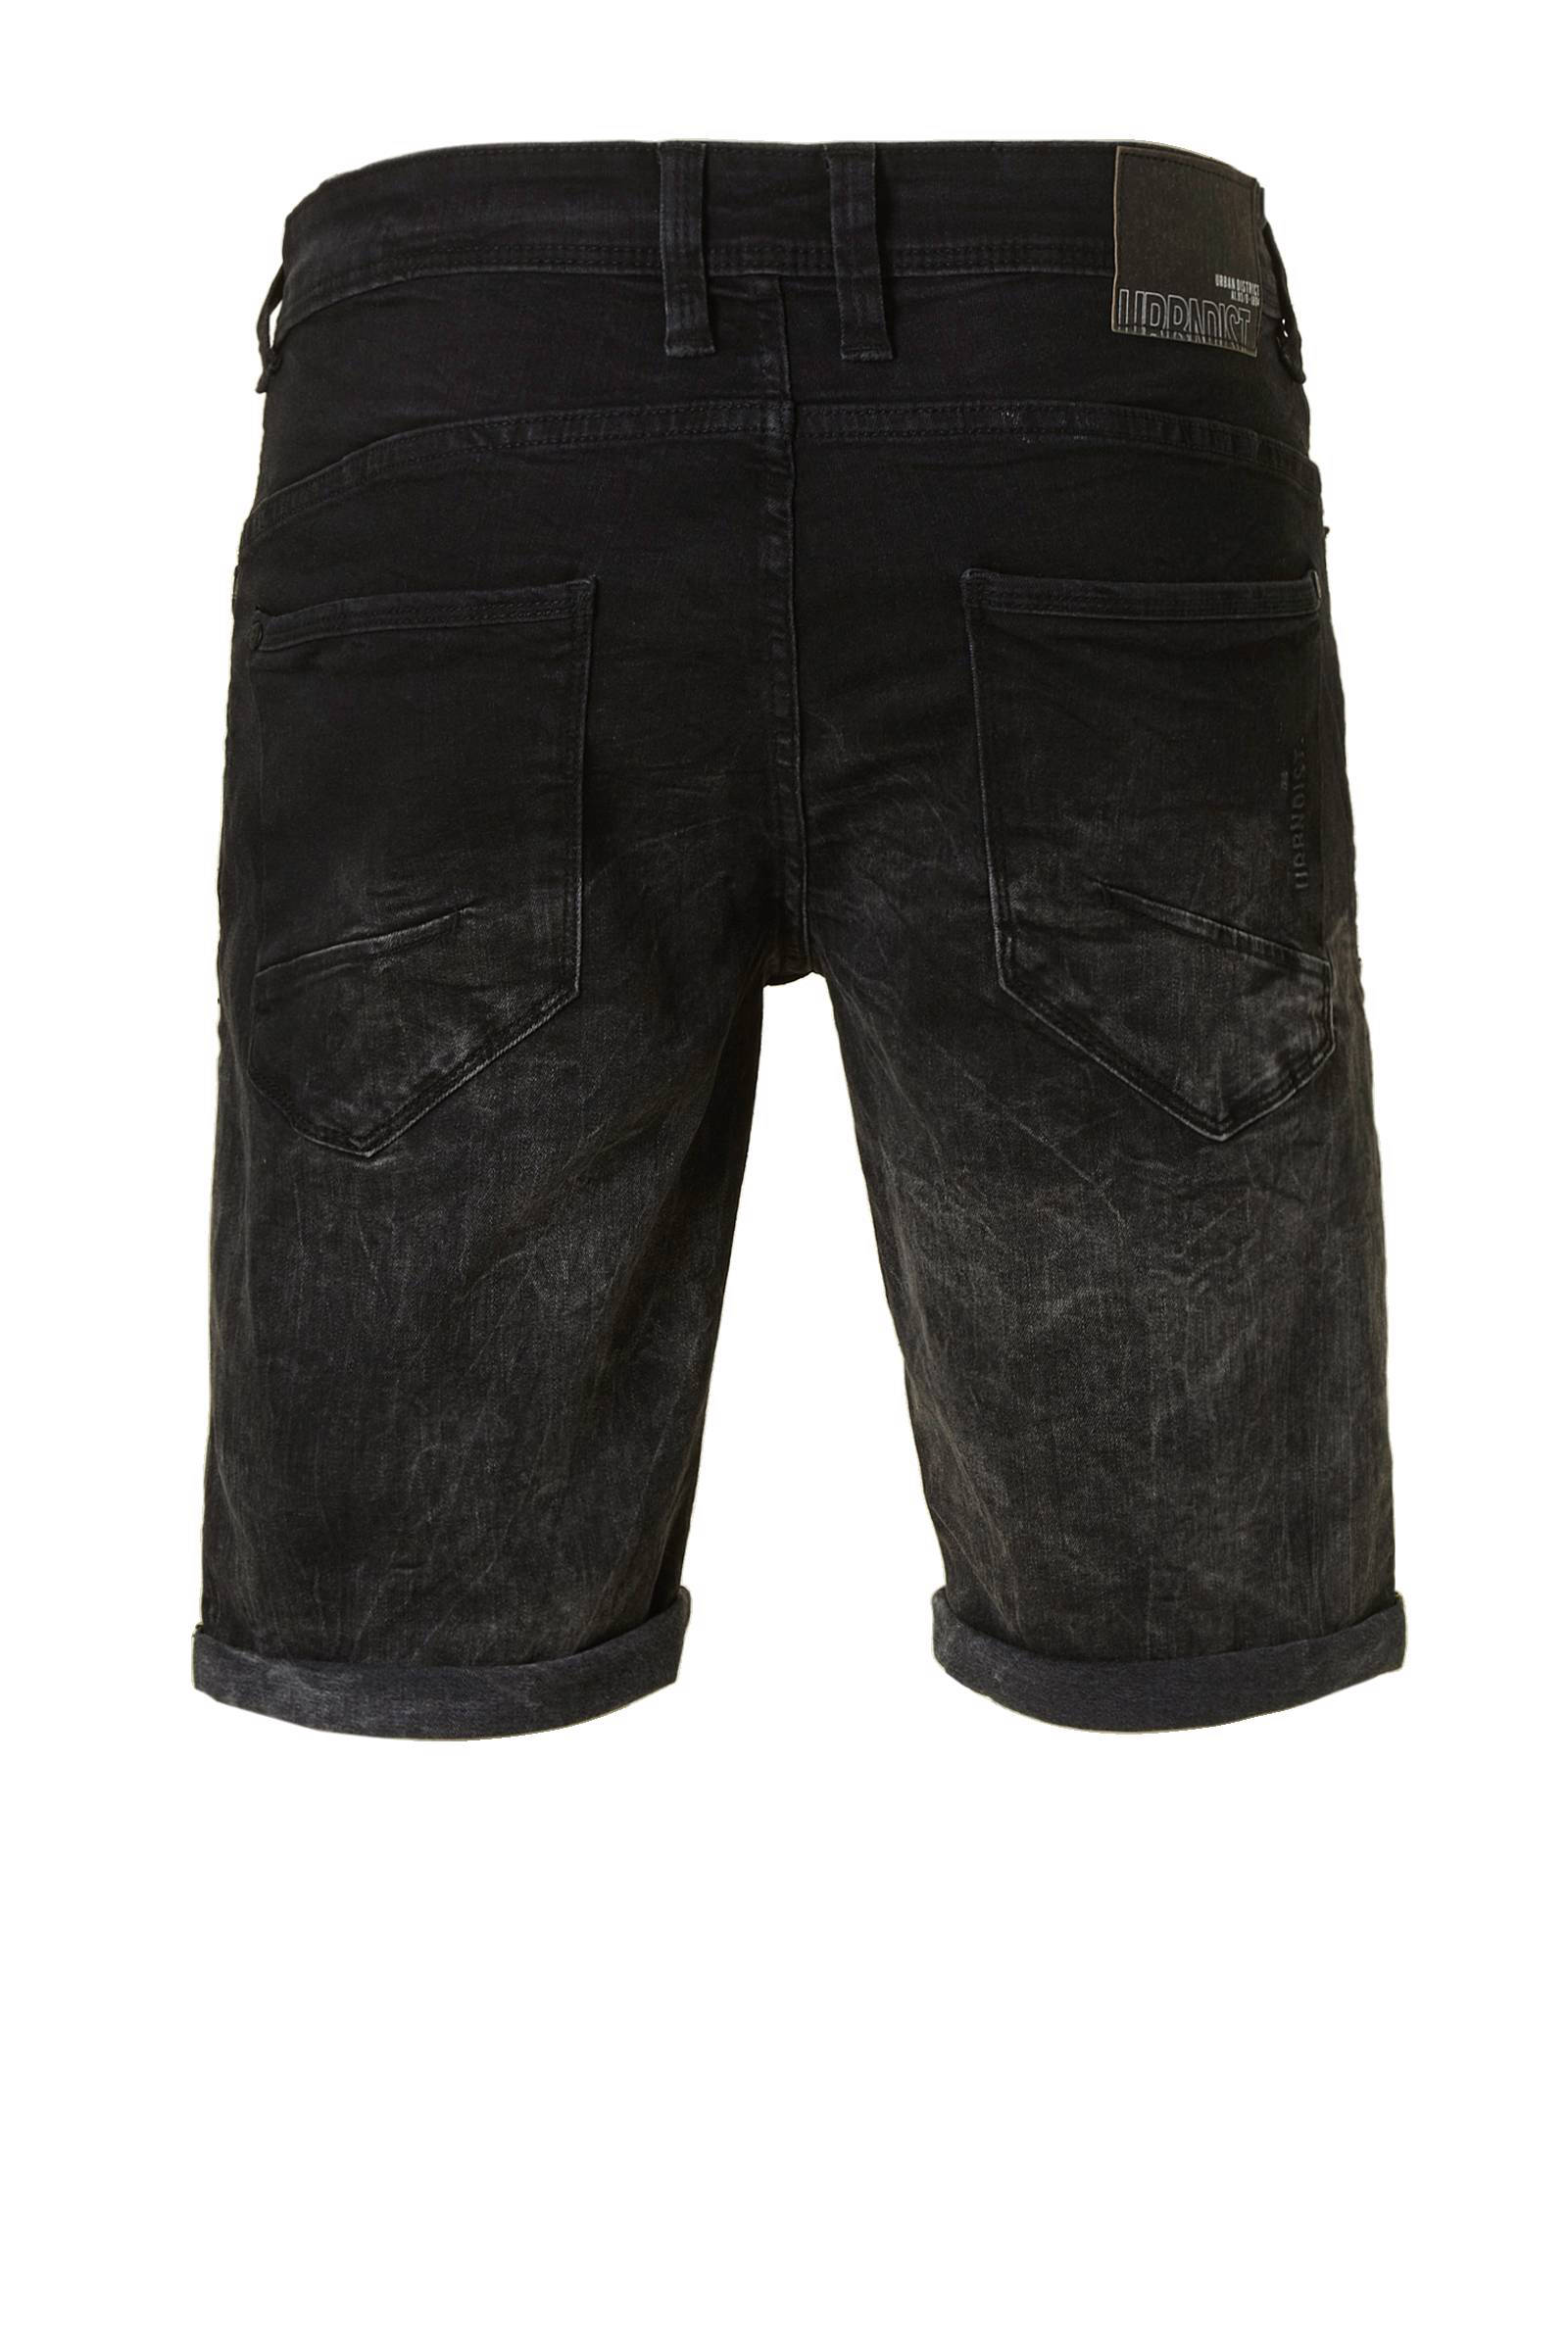 angelo litrico urban district jeans